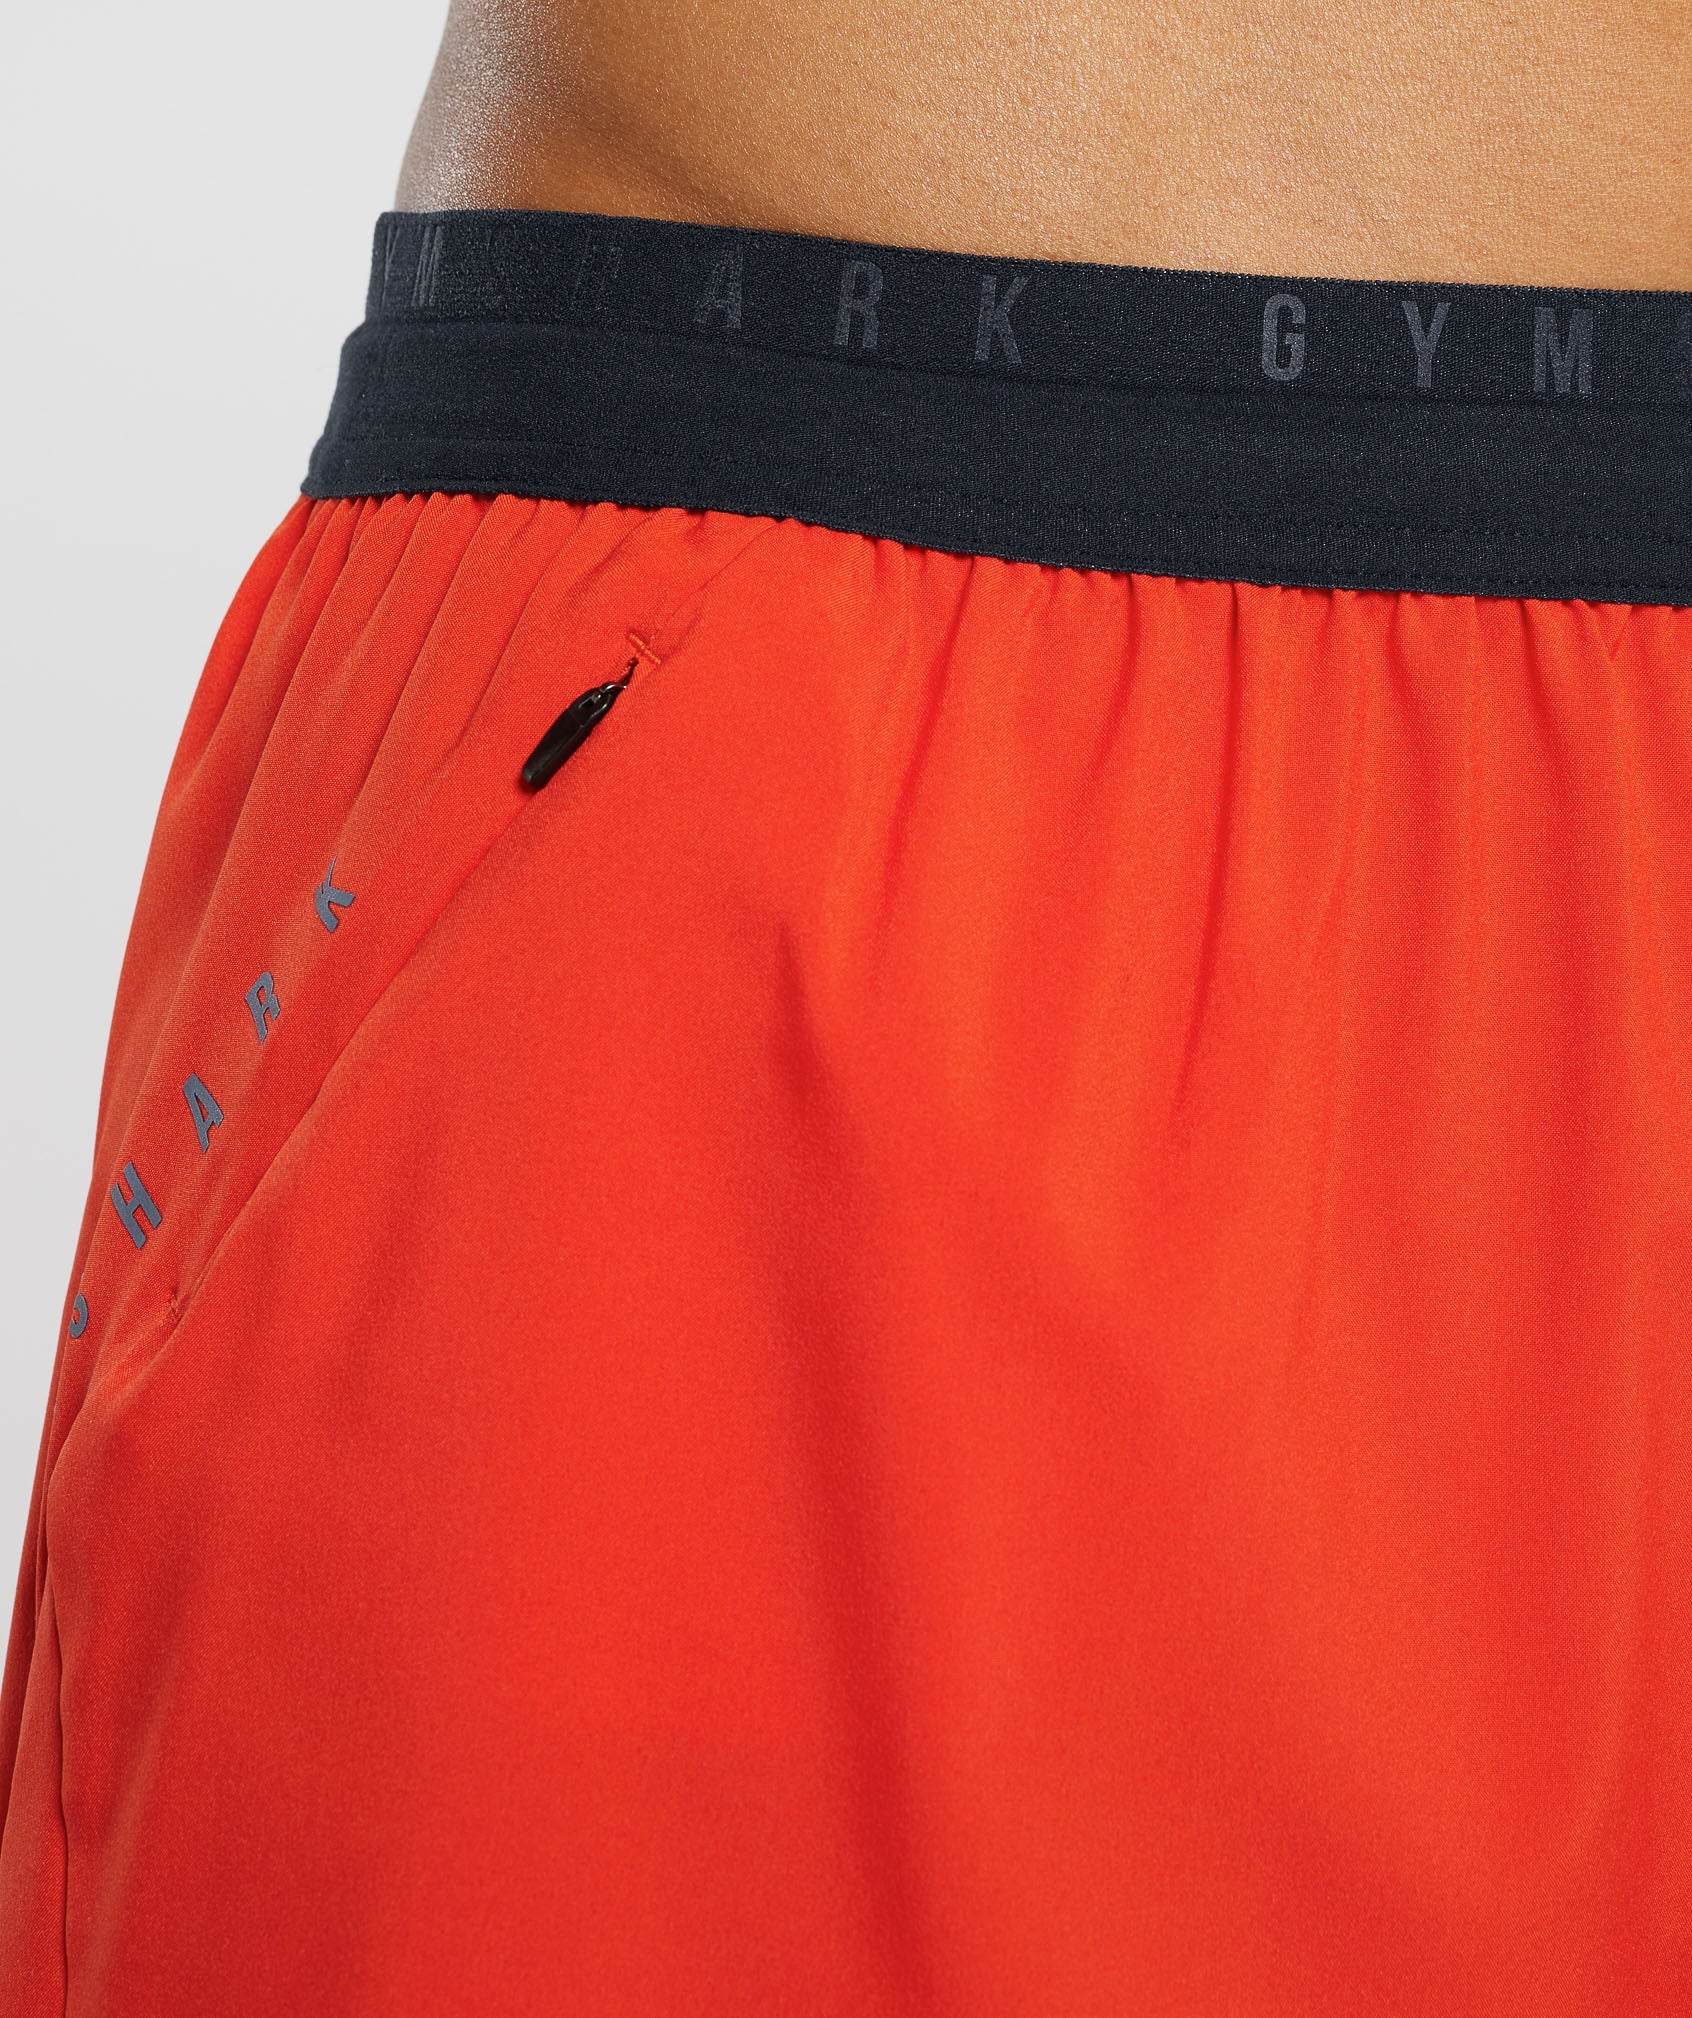 Running Two-in-One Shorts in BURNT ORANGE S23-r